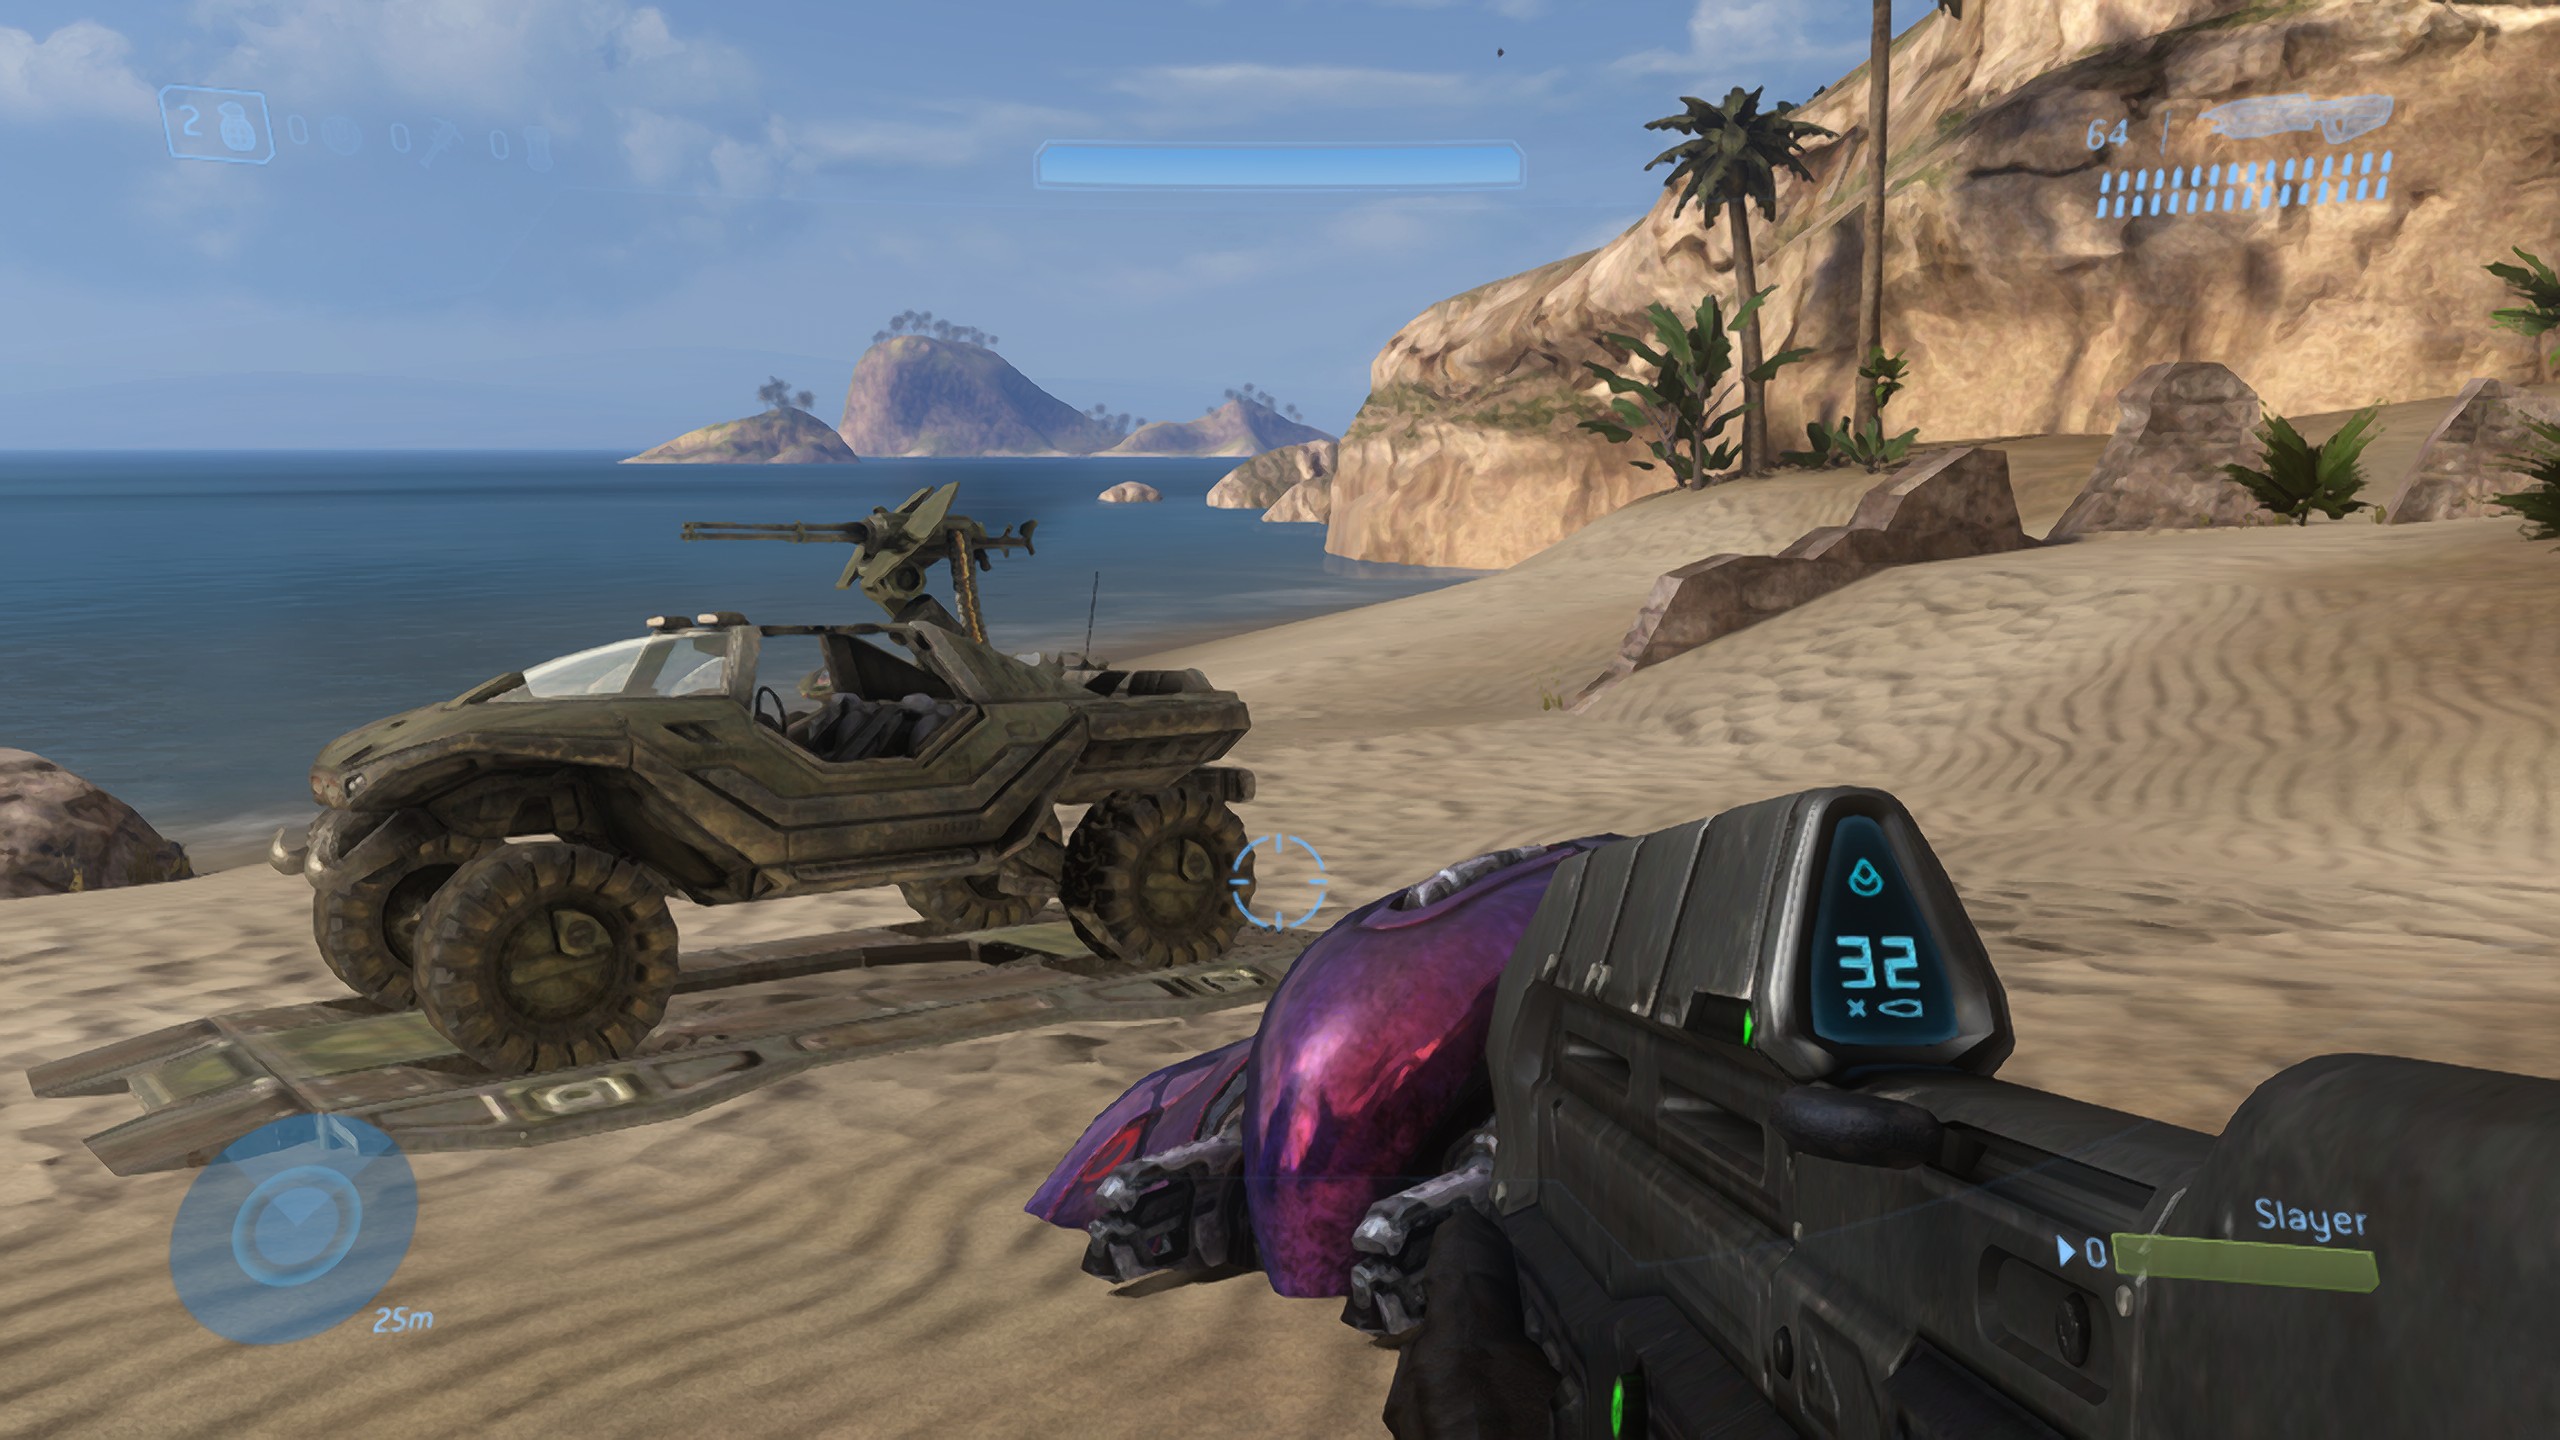 FSR — Halo 3, no in-game AA, extreme quality FXAA, 1152x640 upscaled to 2304x1280 and then to 2560x1440 by FSR